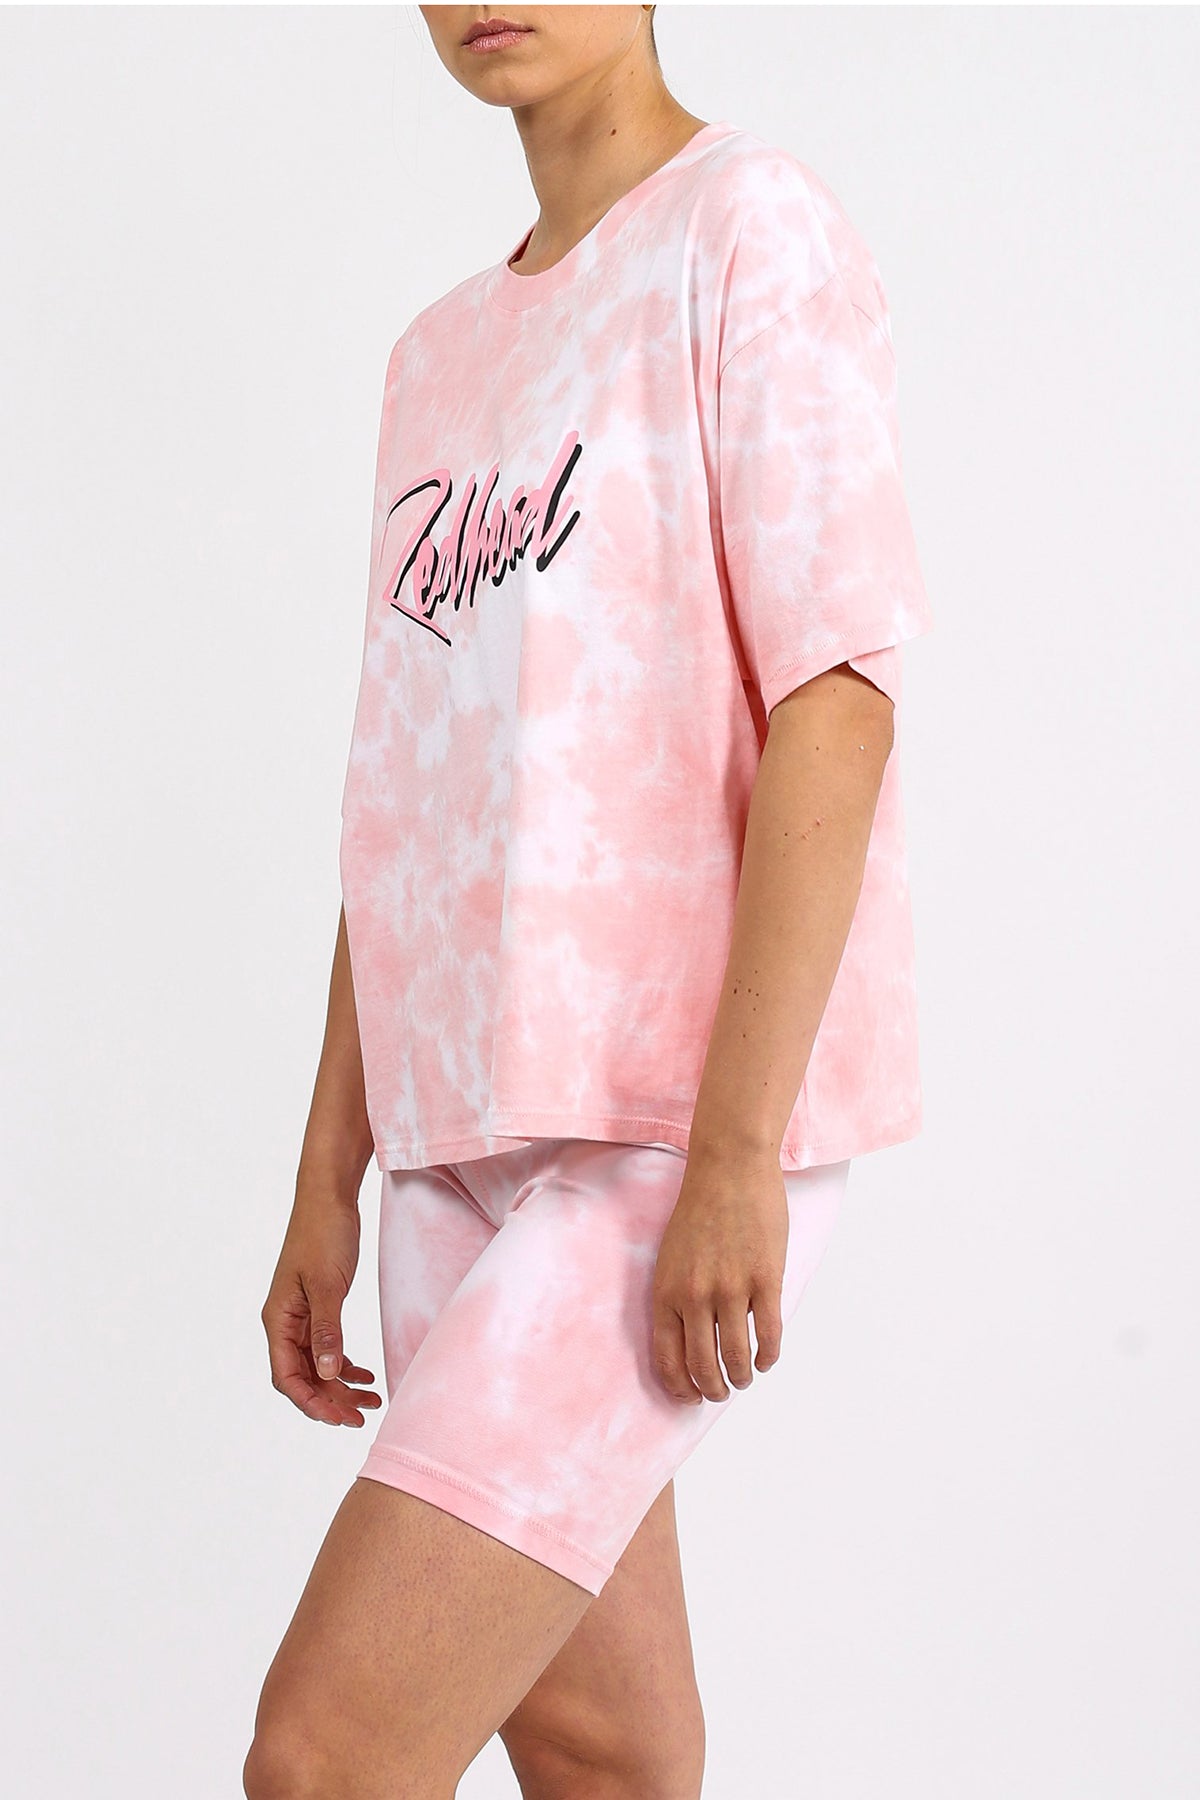 The "REDHEAD" Pink Marble Tie-Dye Boxy Tee